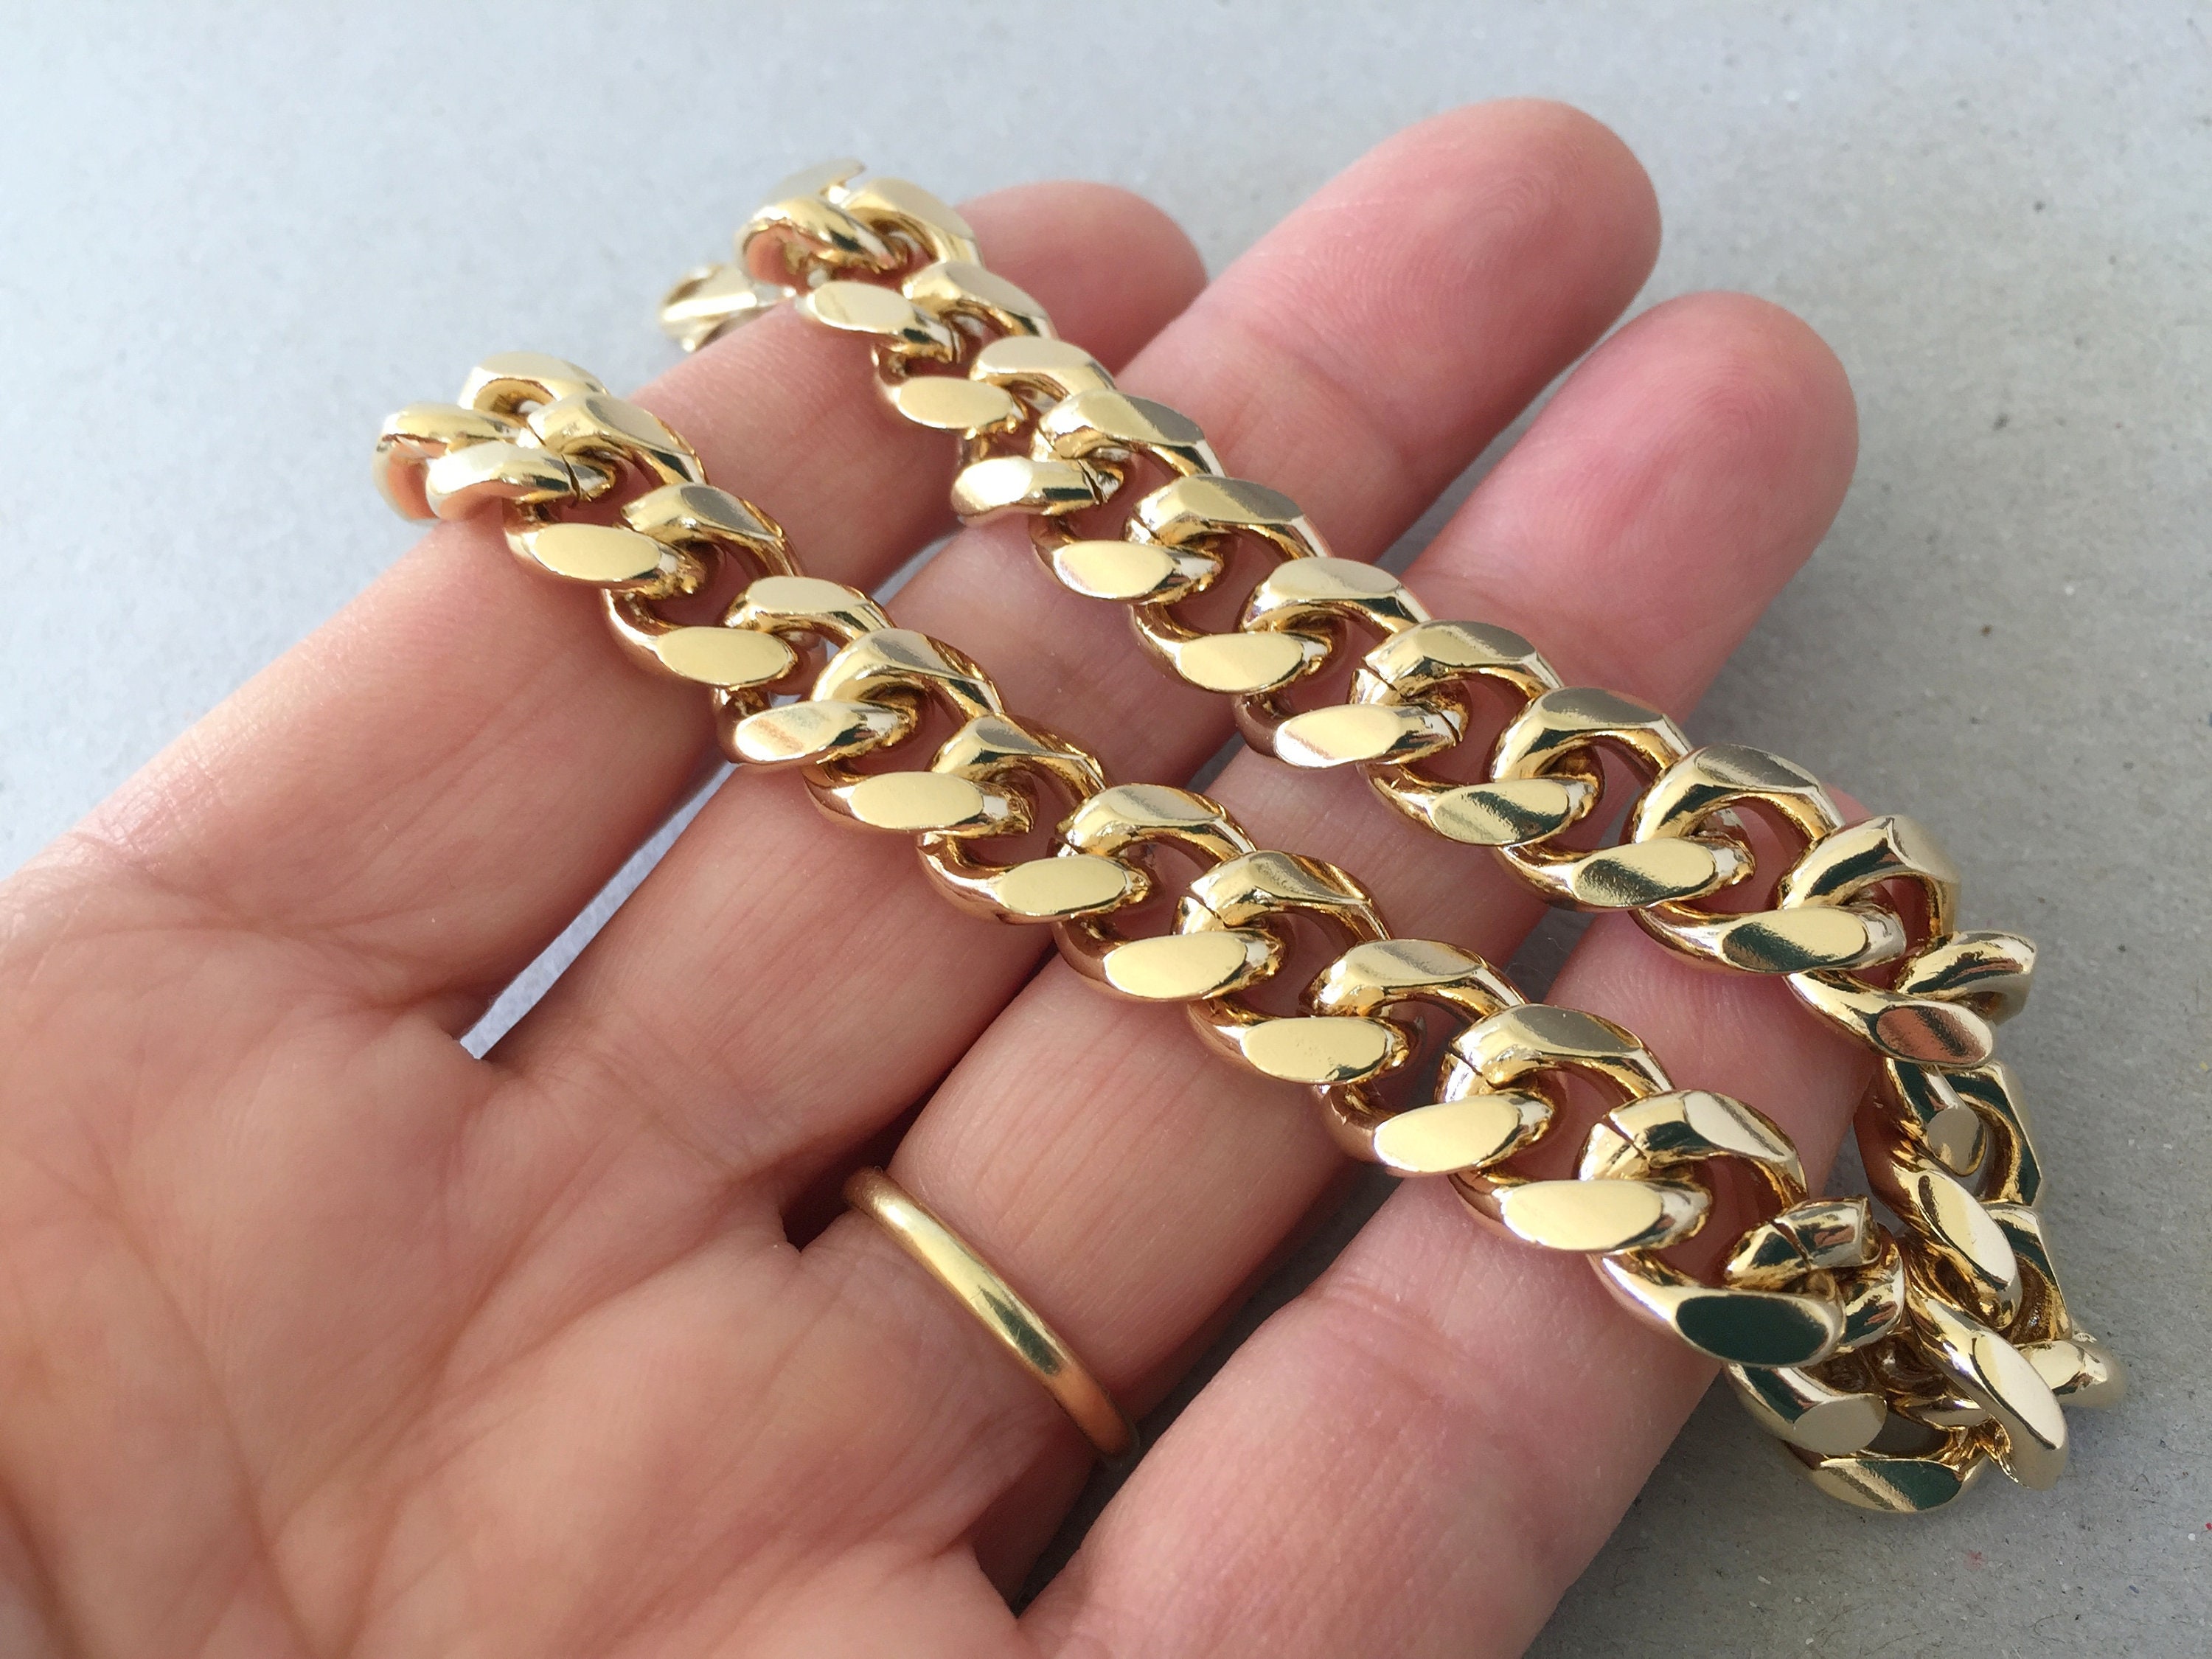 Men's Gold Bracelet, Thick Curb Link Gold Chain, Large Chunky Bracelet, 11mm Heavy Gold Chain ...